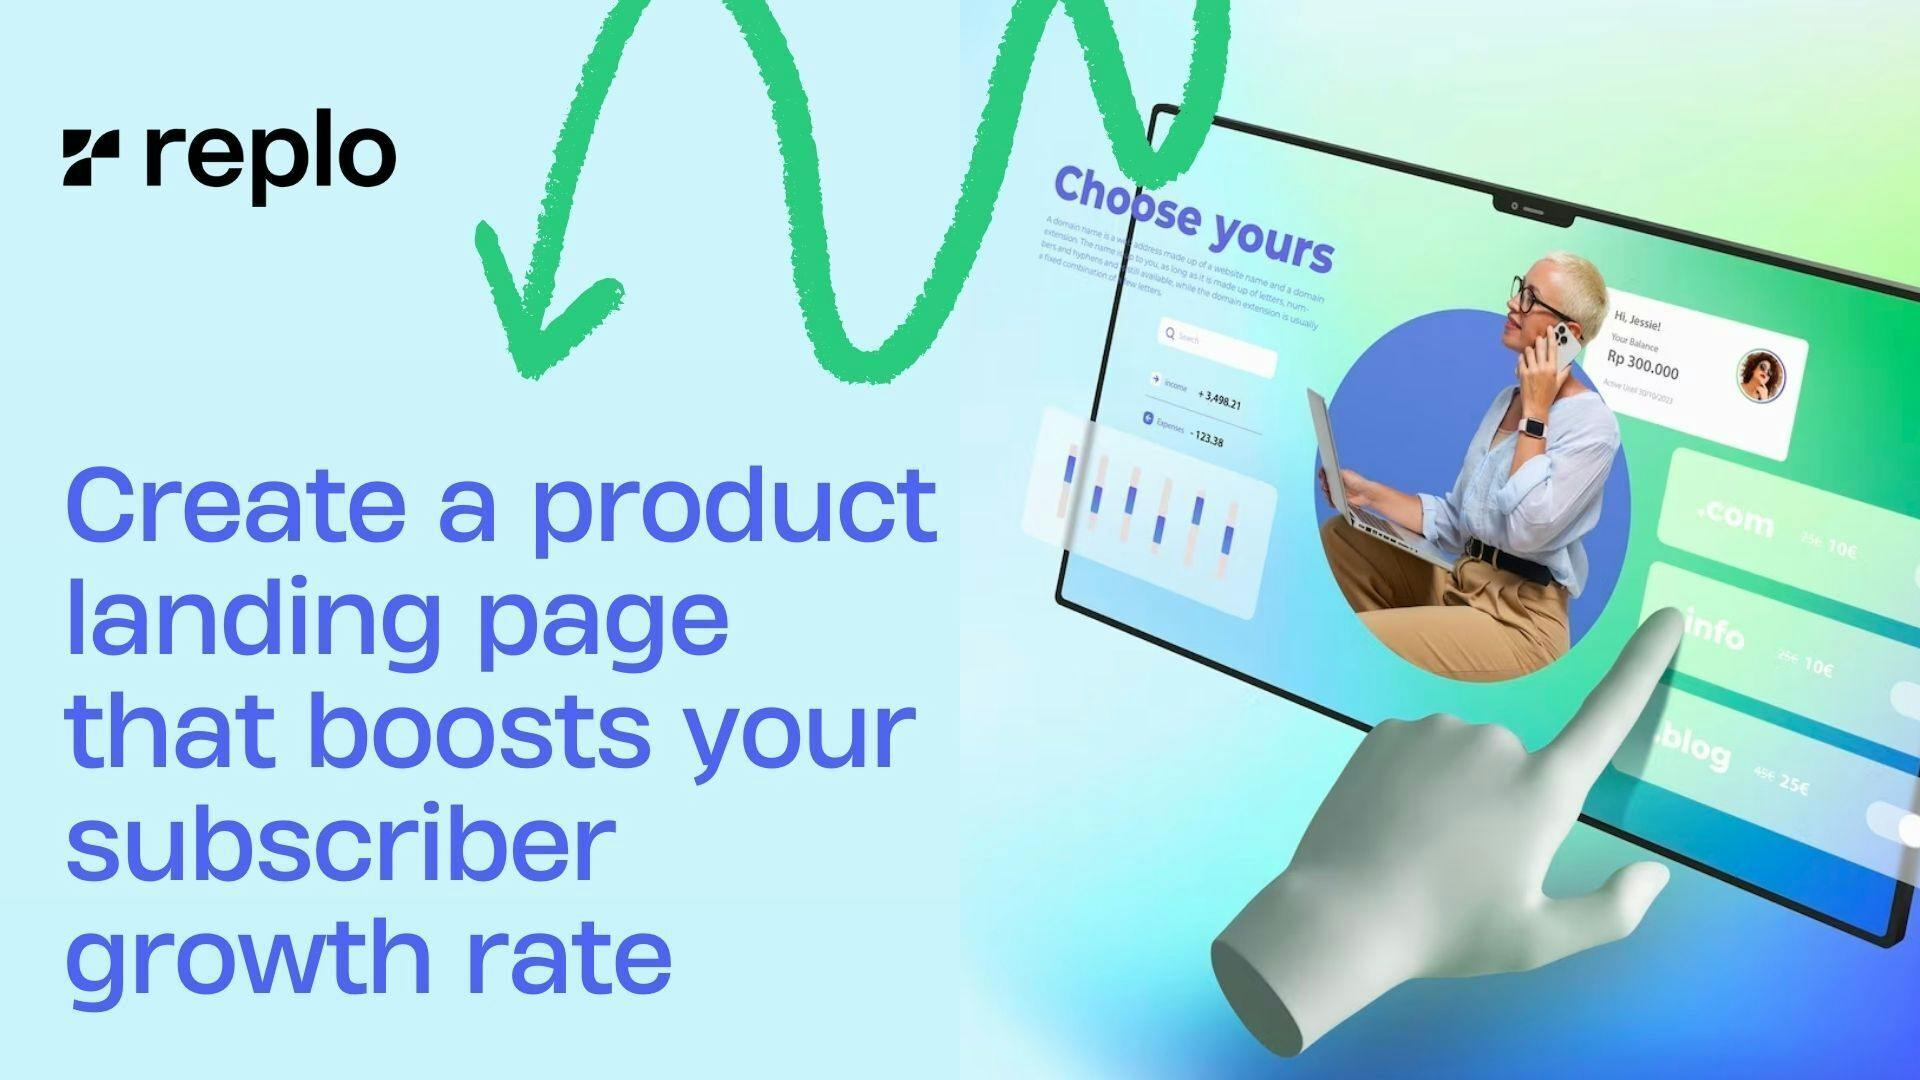 How to create a product landing page that boosts your subscriber growth rate?